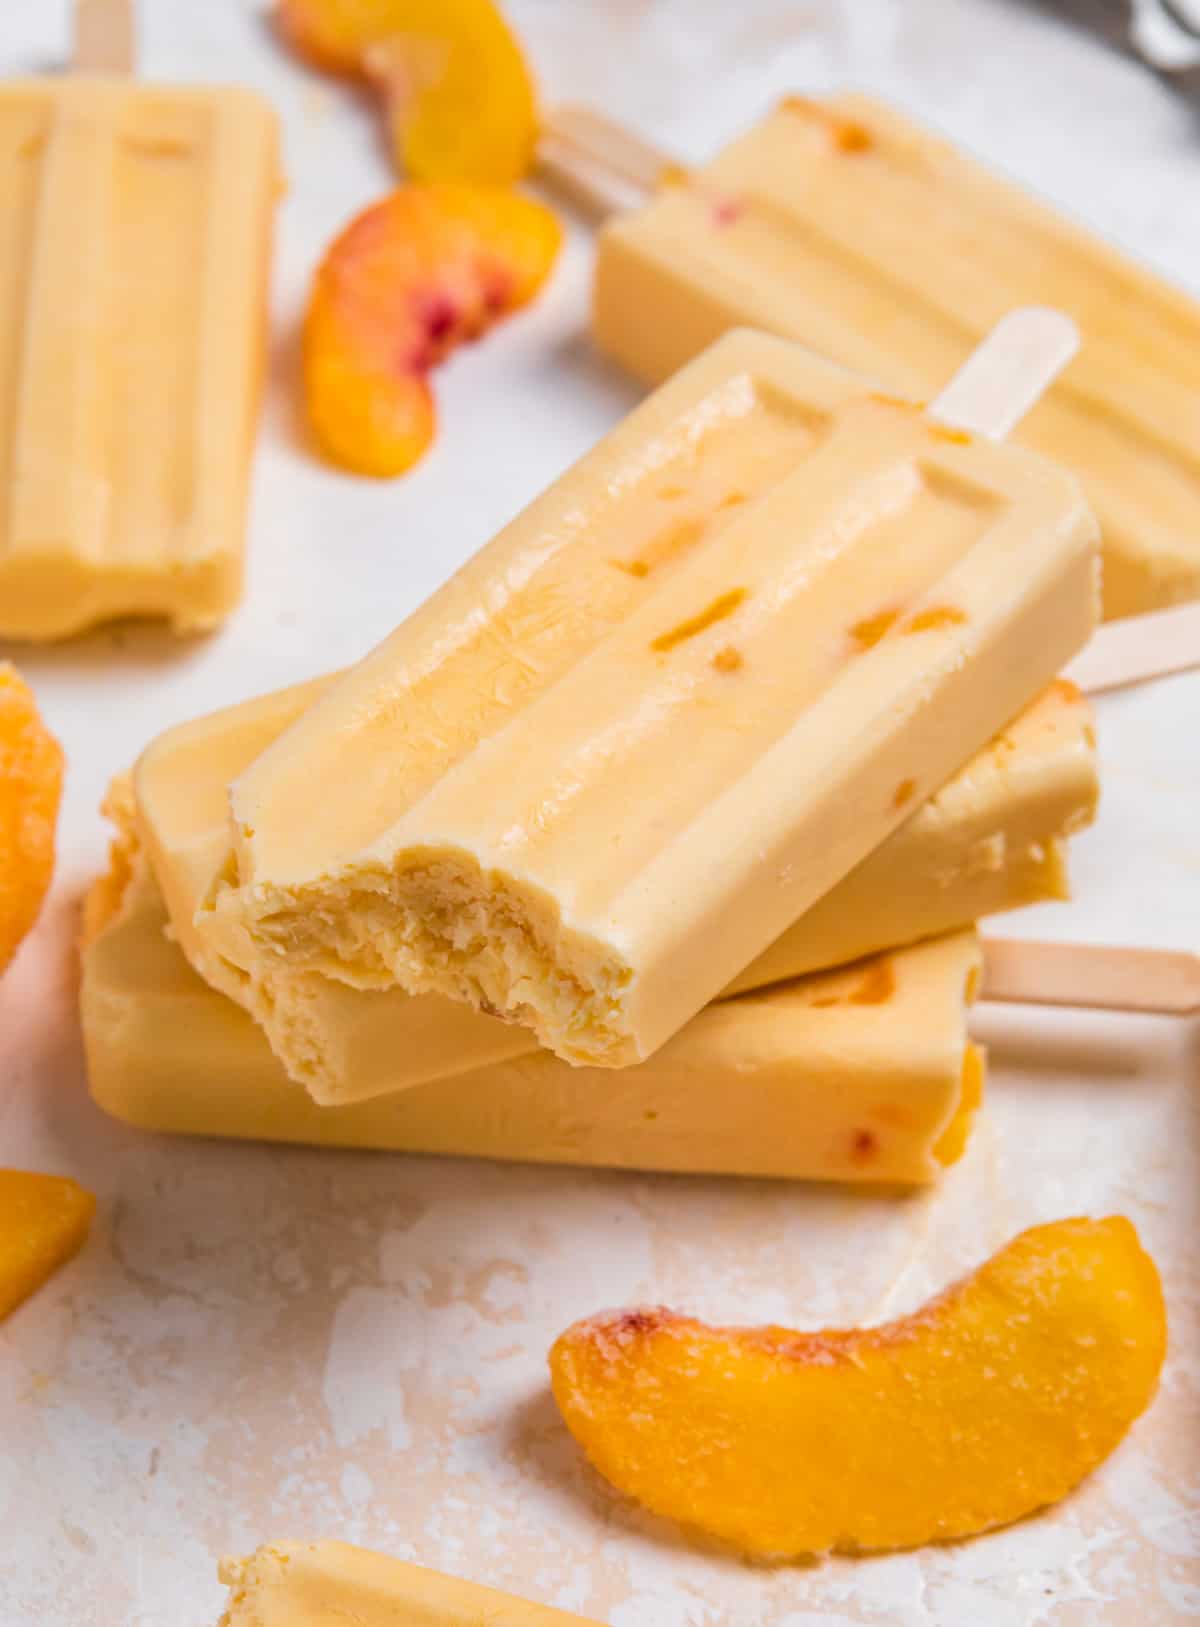 Stacked creamy peach popsicles with bite taken out of top popsicle.